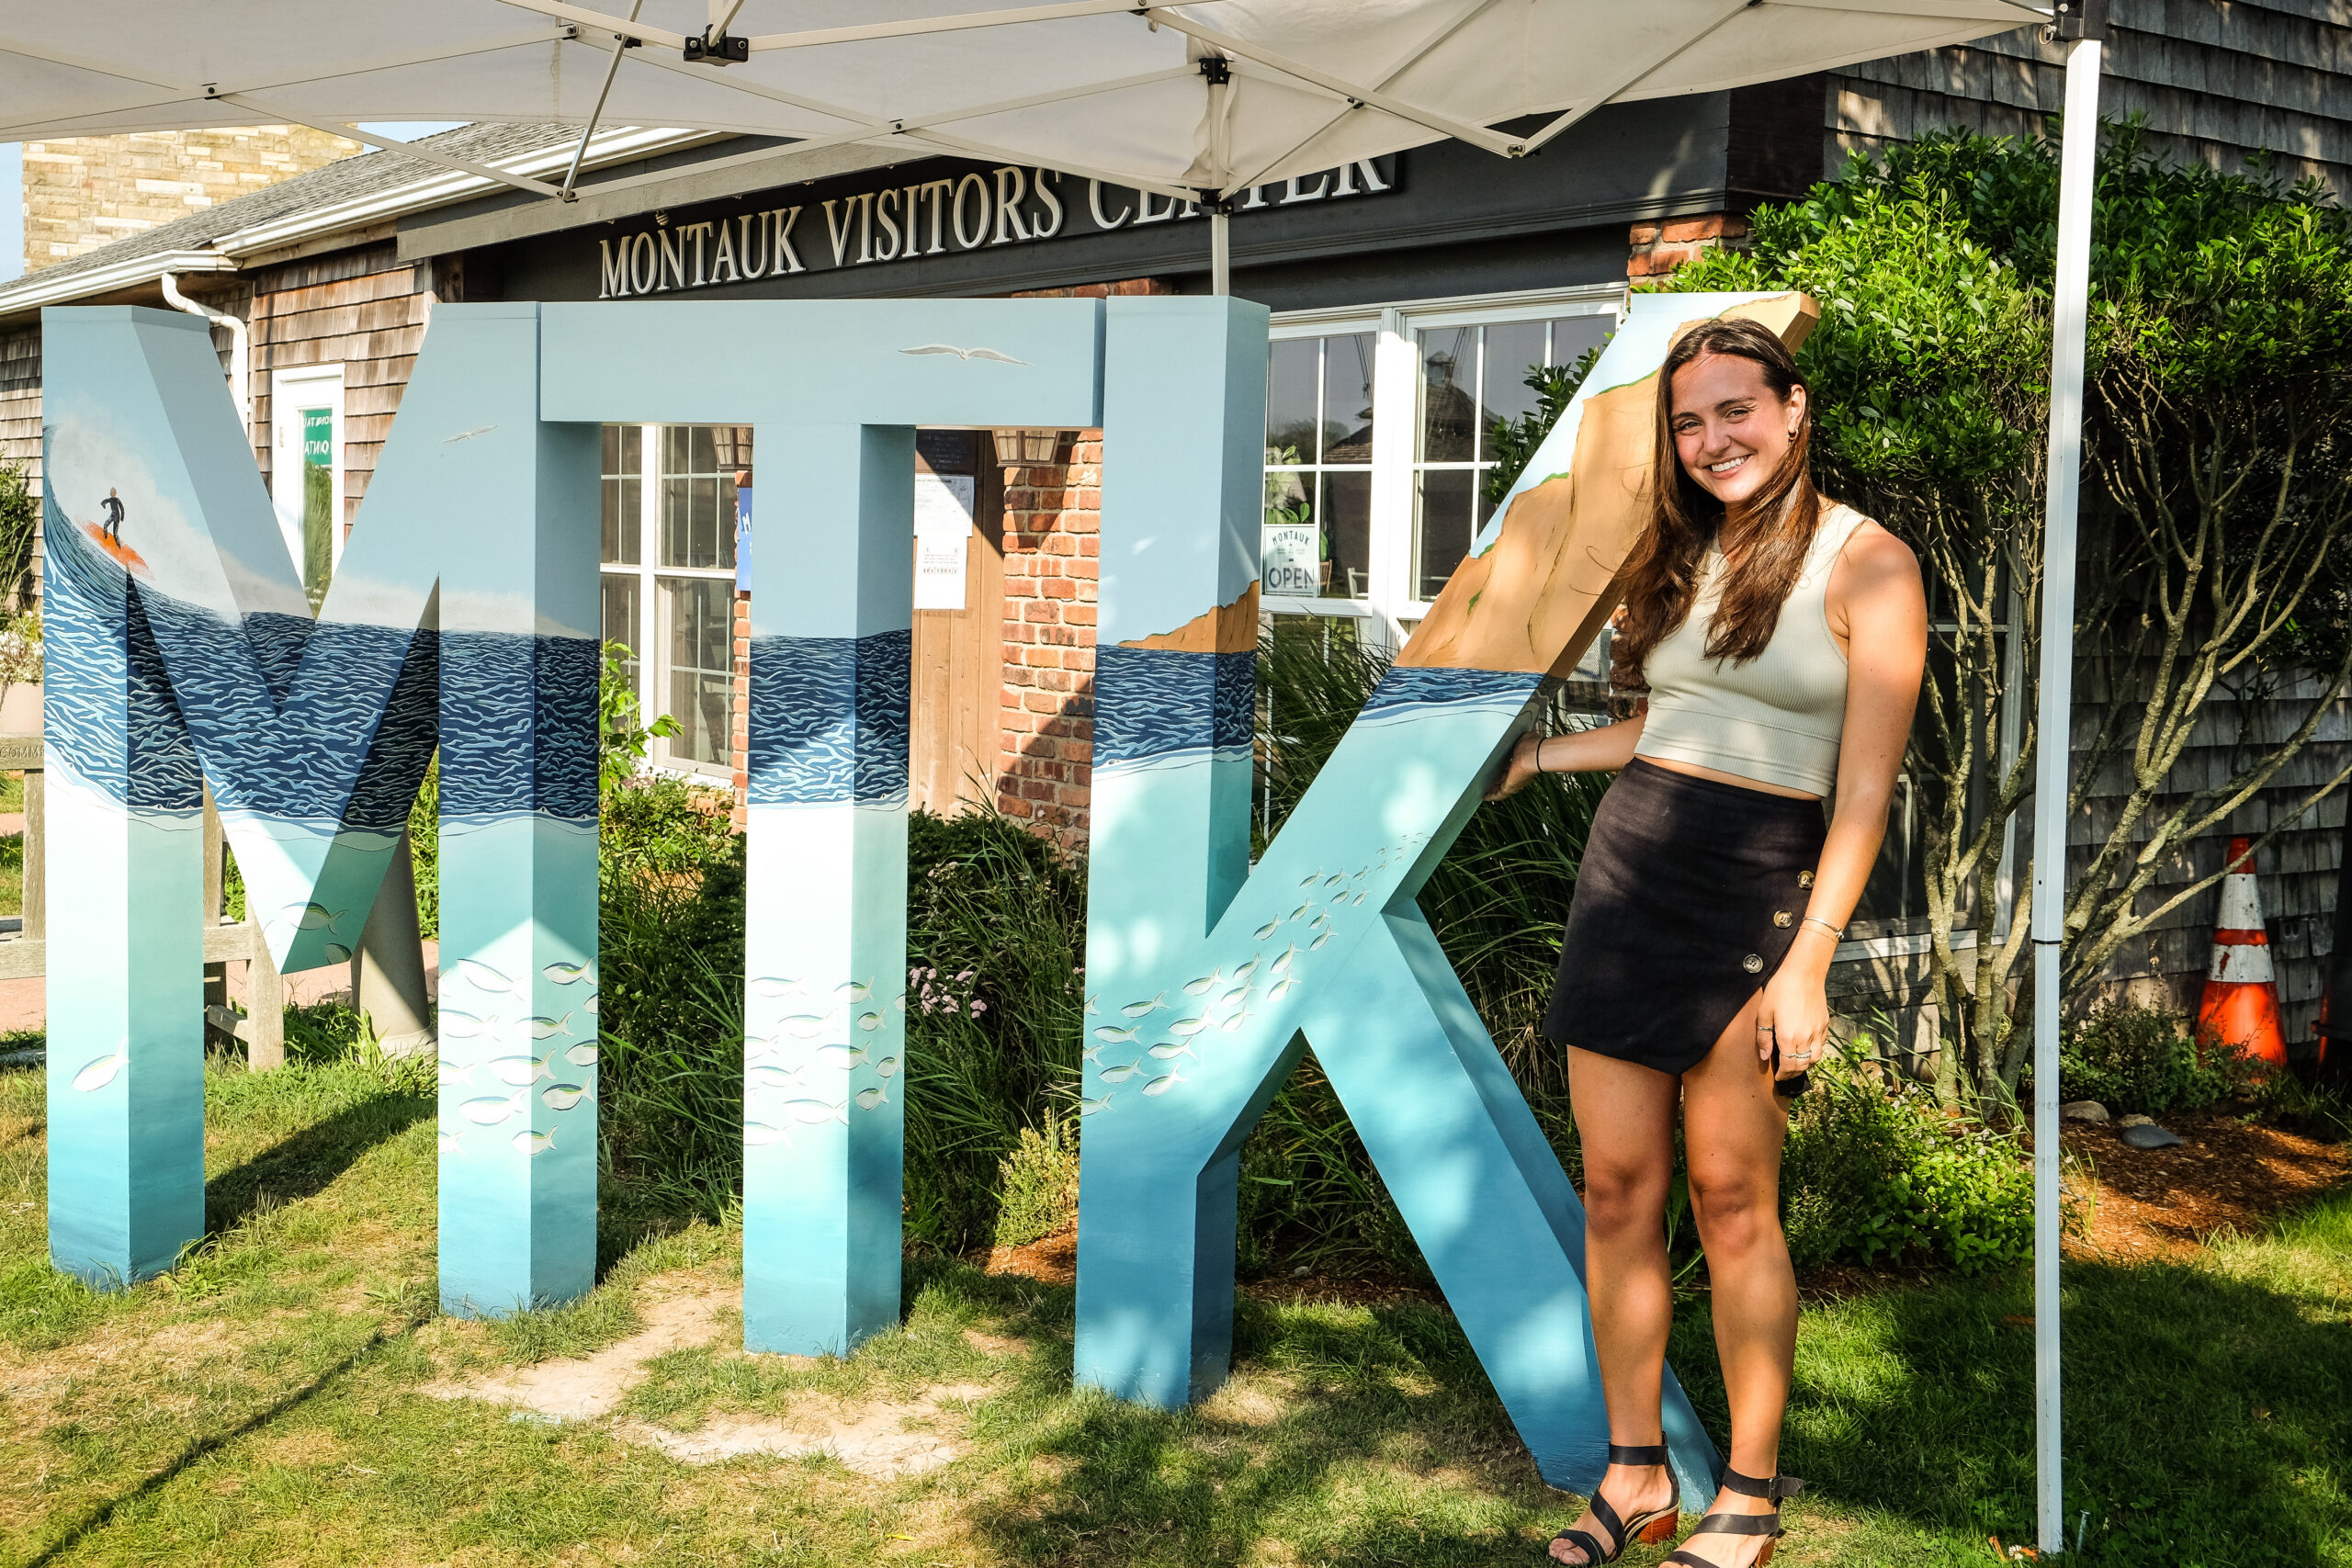 Artist Kylie Ogburn with the painted MTK letters in Montauk. IAN COOKE/COURTESY MONTAUK CHAMBER OF COMMERCE